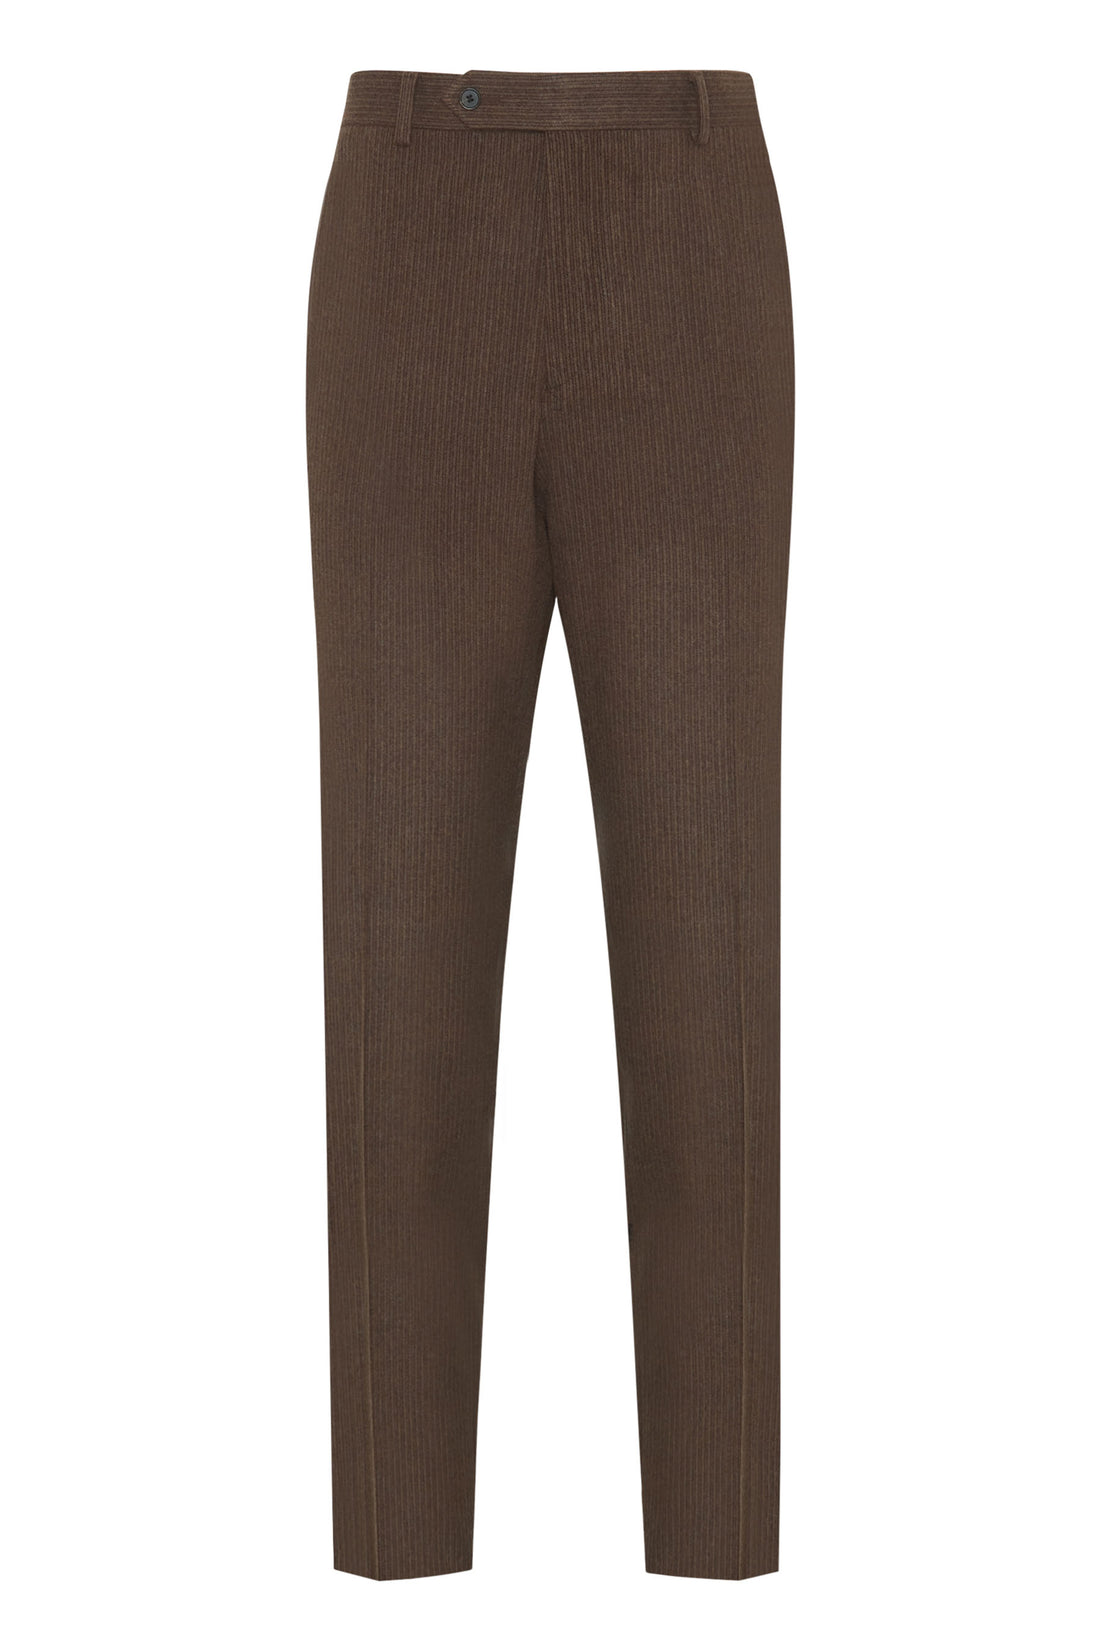 Vicuna Wool/Cashmere Corduroy Pant